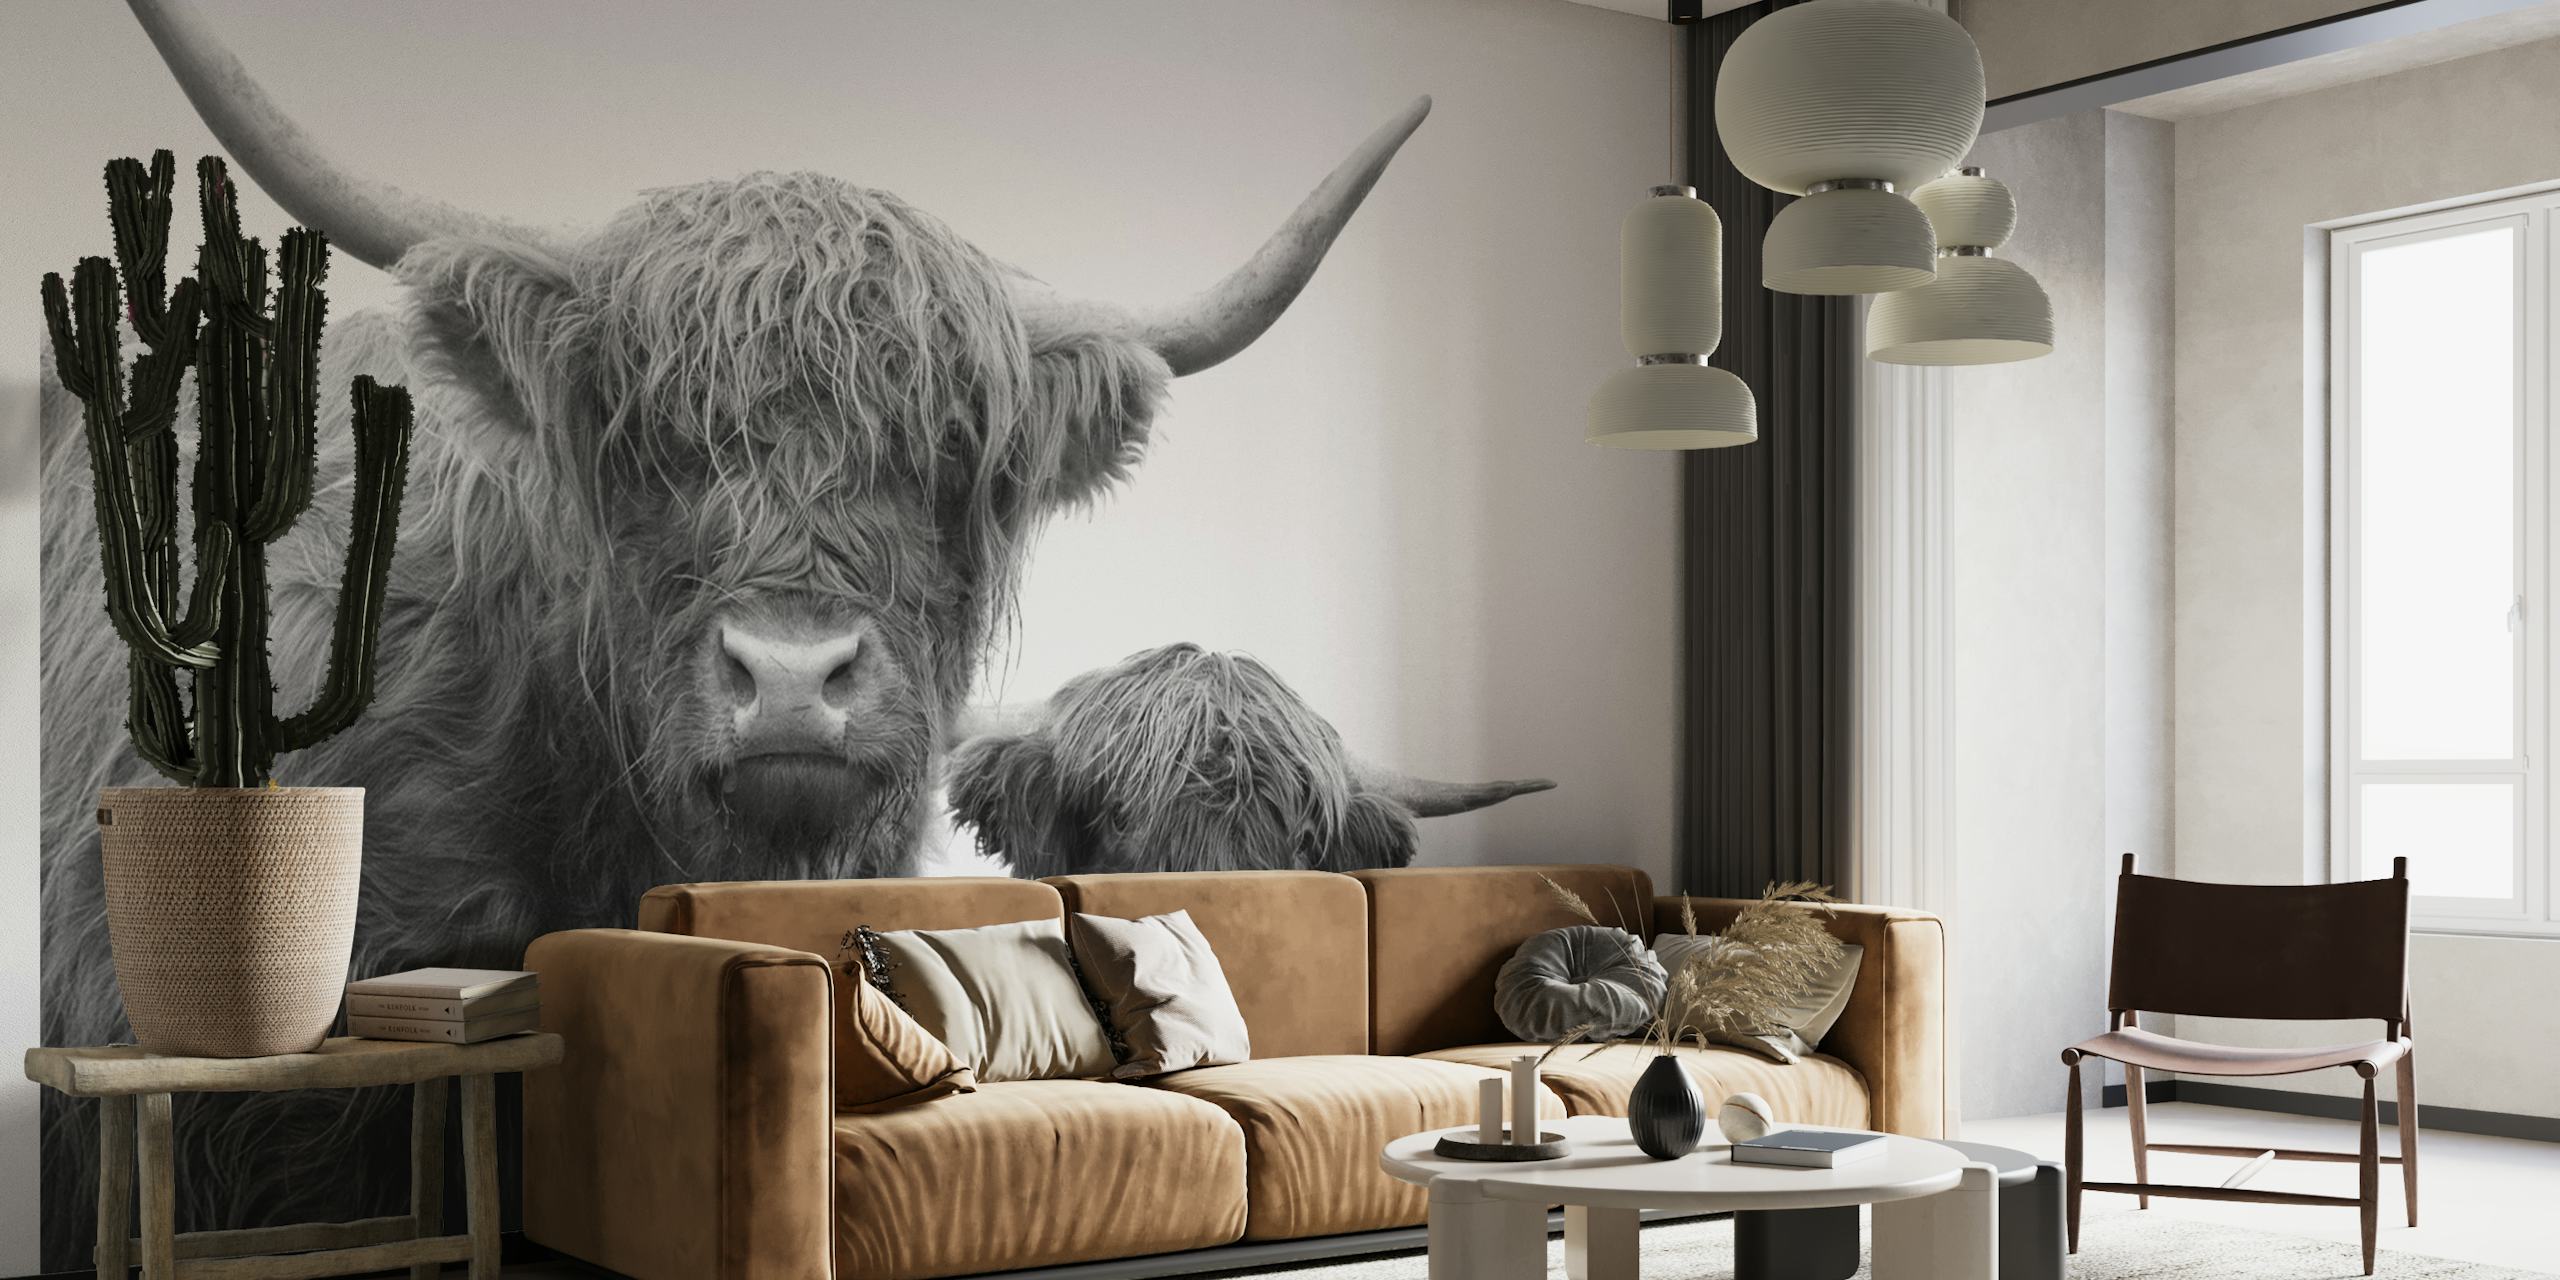 Black and white wall mural of highland cows showing rich texture and peaceful expressions